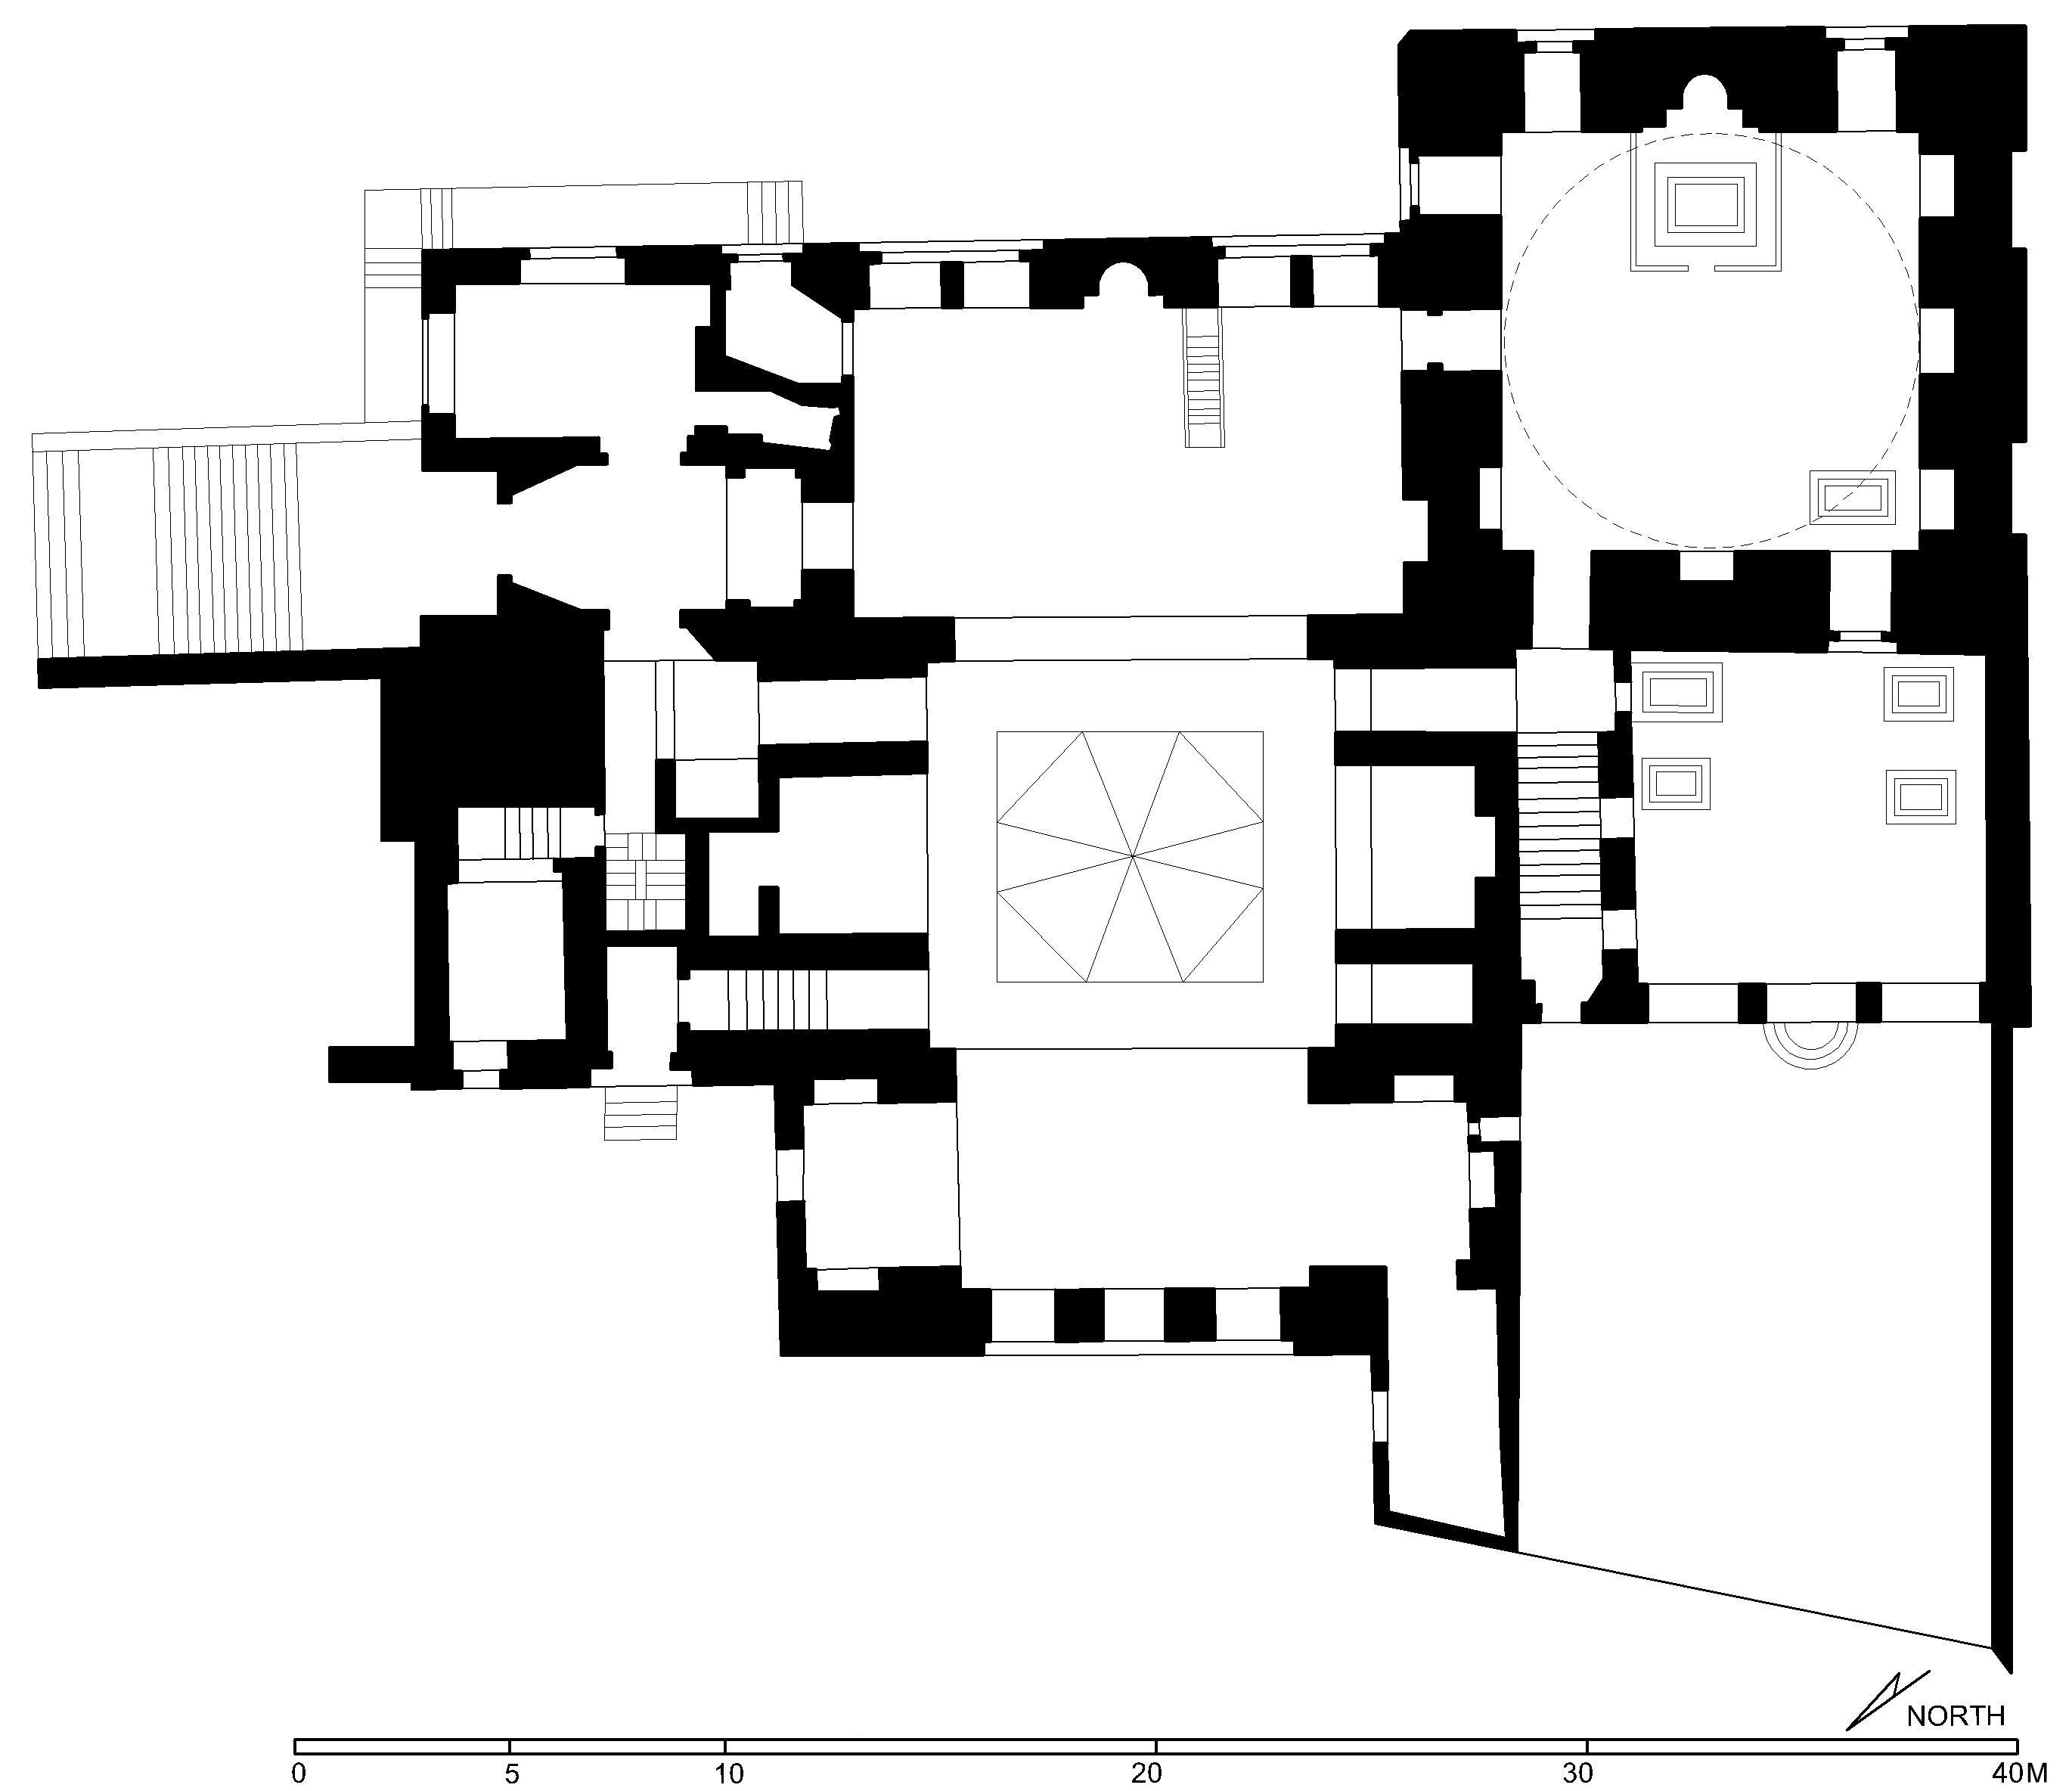 Masjid al-Sultan al-Ashraf Qaytbay - Floor plan of the funerary complex (after Meinecke) in AutoCAD 2000 format. Click the download button to download a zipped file containing the .dwg file.